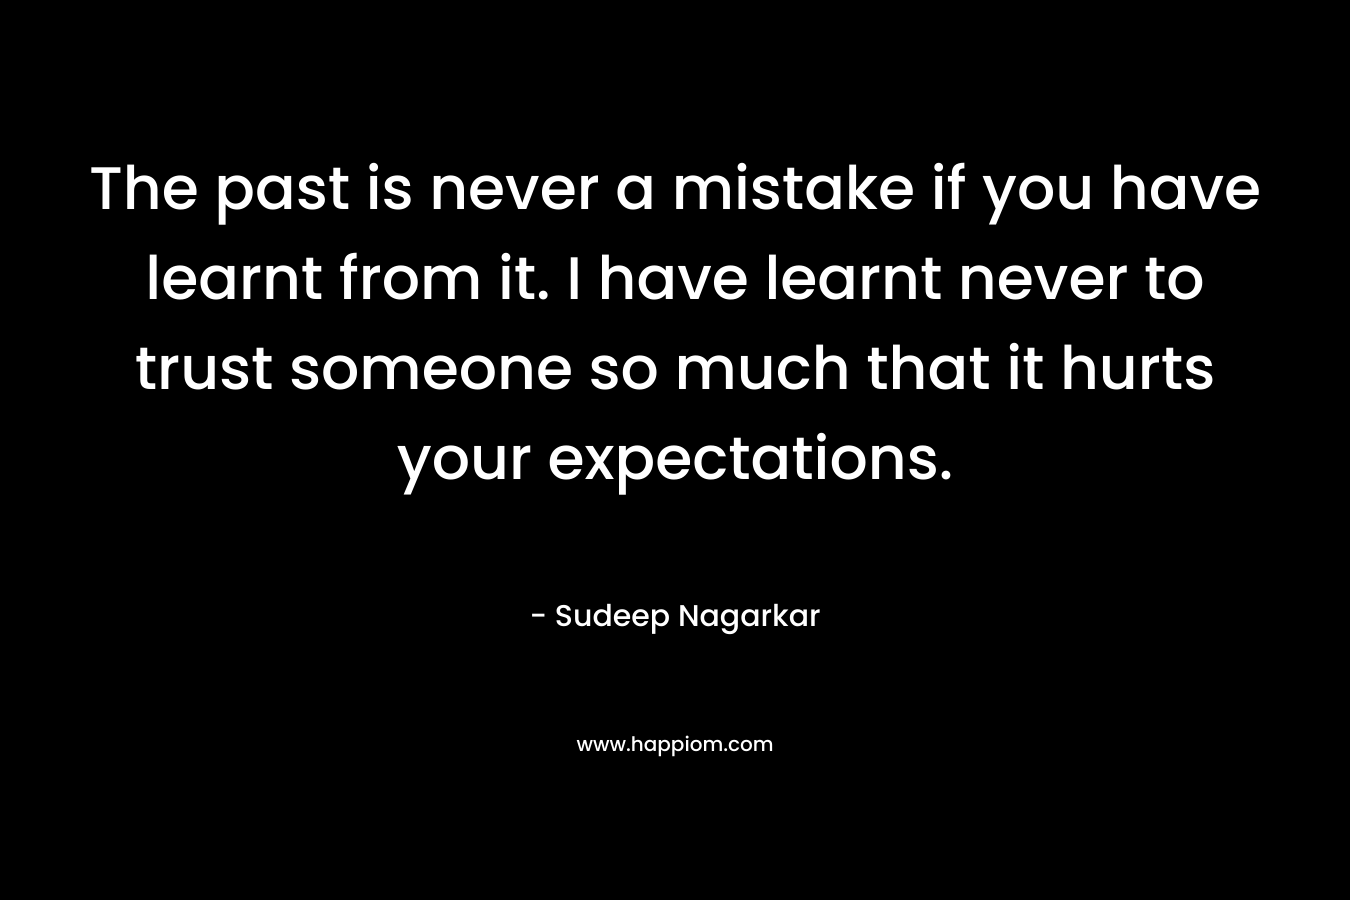 The past is never a mistake if you have learnt from it. I have learnt never to trust someone so much that it hurts your expectations.